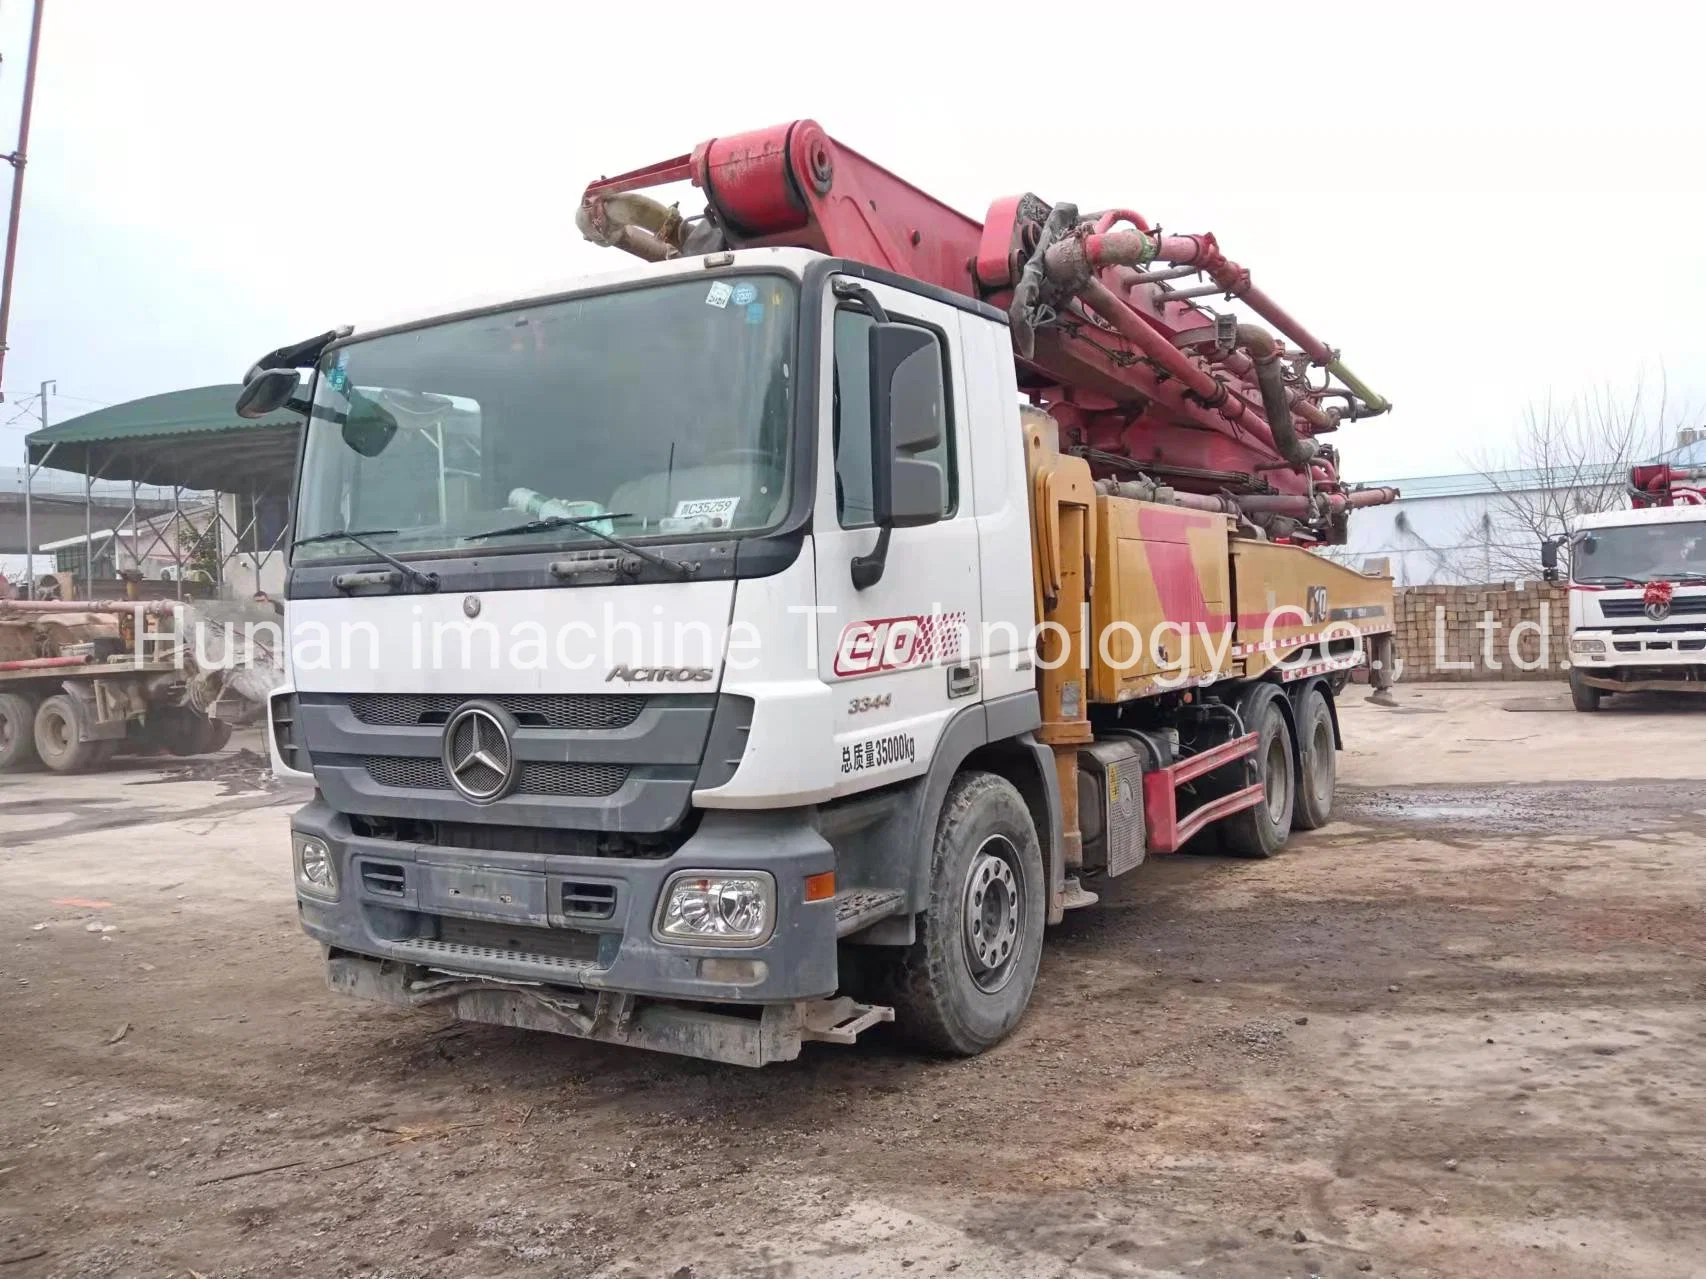 Construction Machinery Concrete Machinery Used Concrete Pump Truck C10 Sy52mfor Sale